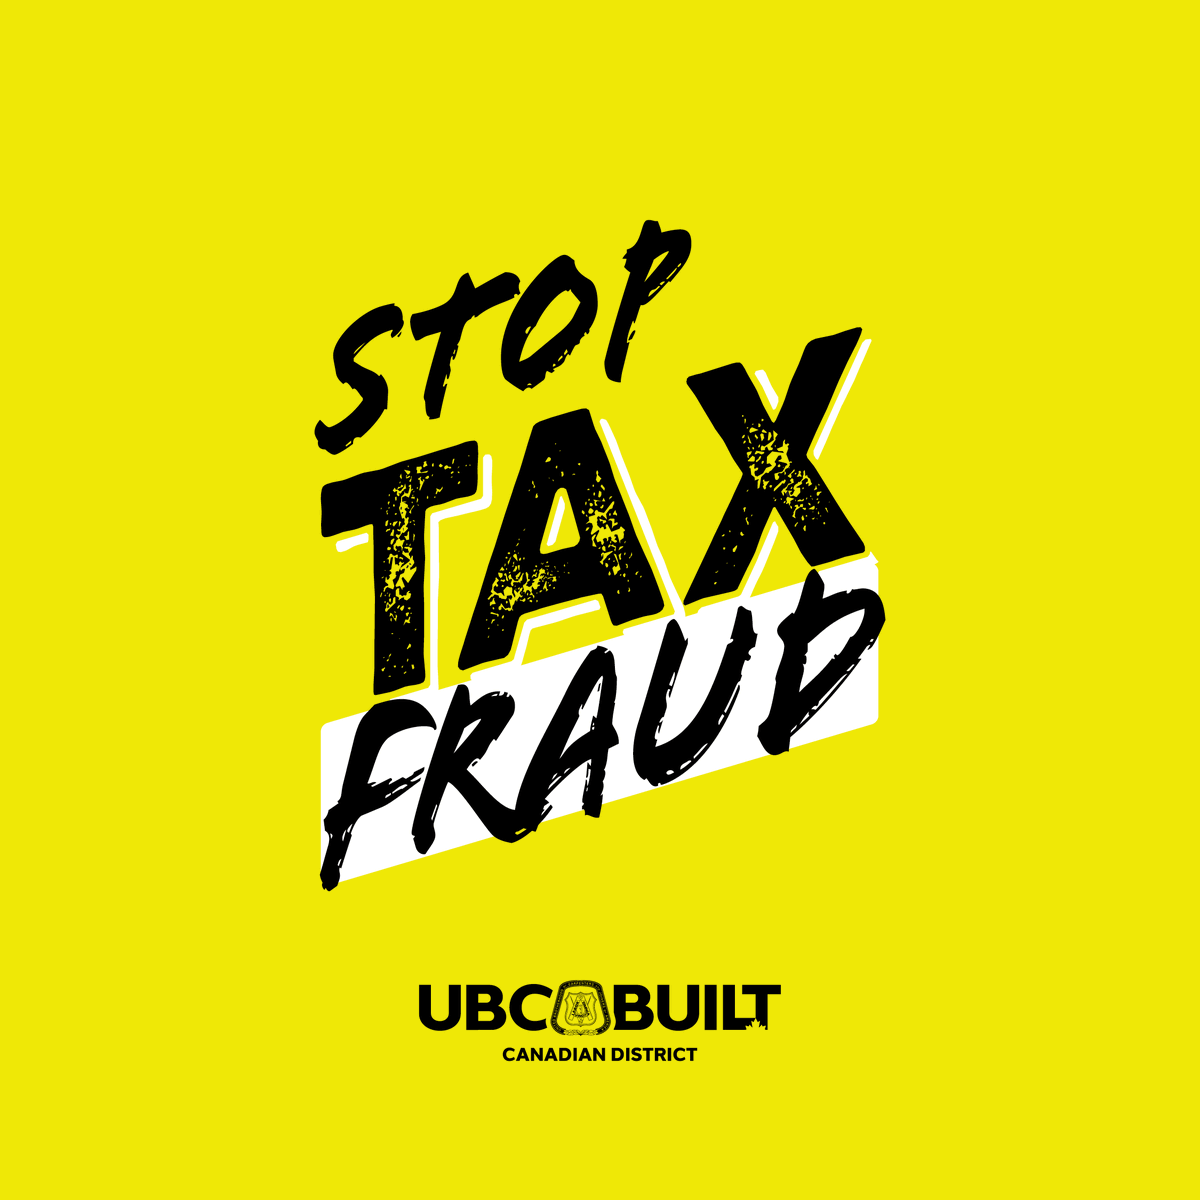 Builders who follow fair practices contribute to building their communities —roads, bridges, hospitals and schools, and social services. Visit StopTaxFraud.ca for more information. @ubcbuilt_candistrict @ubcbuilt_crc #askyourselfwhy #TFDOA2024 #stoptaxfraud